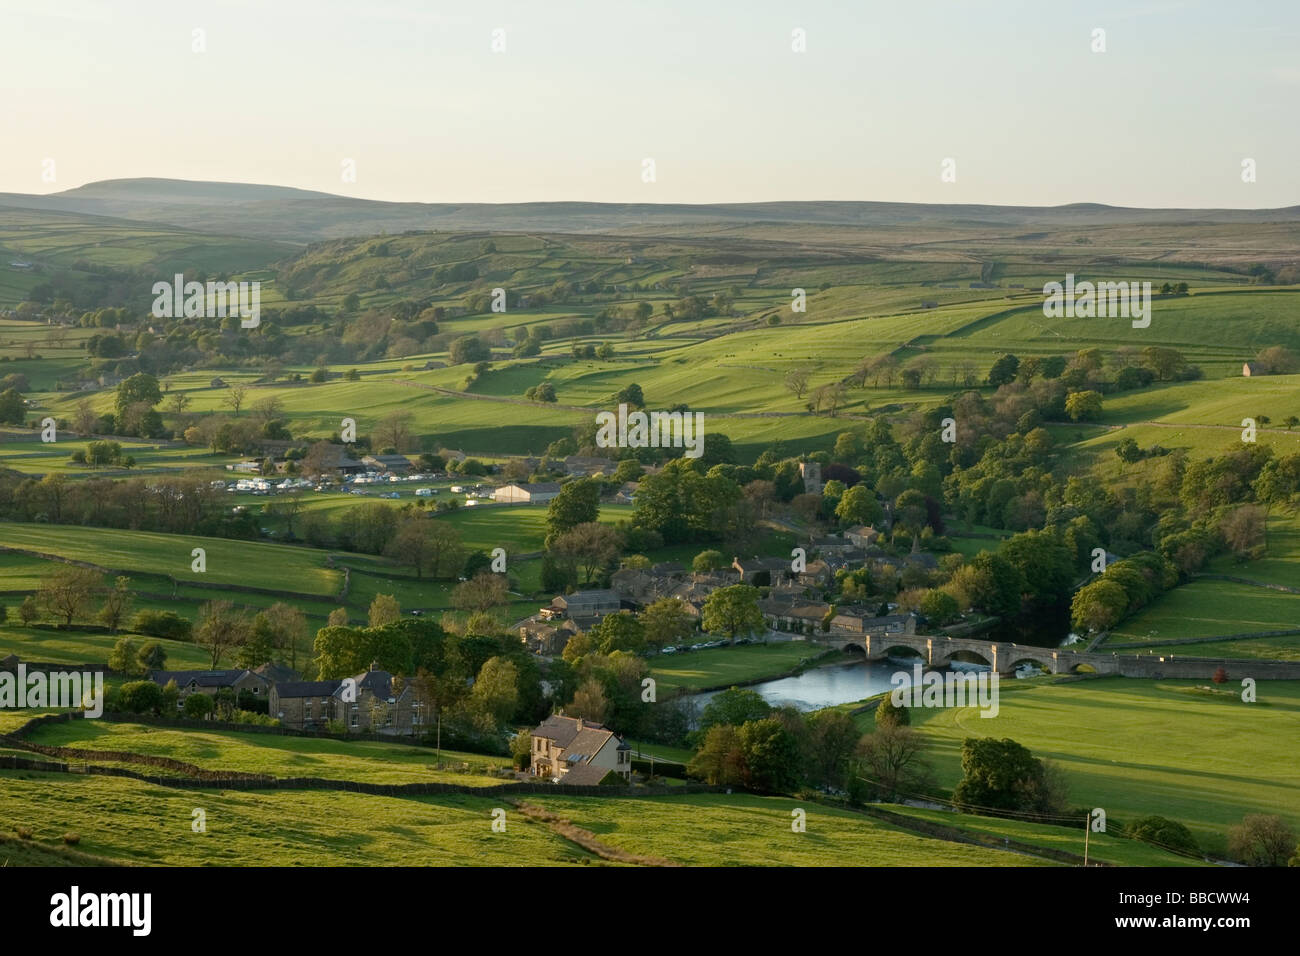 A view of the rolling valley and village of Burnsall, in Wharfedale, Yorkshire Dales, from Burnsall Fells Stock Photo